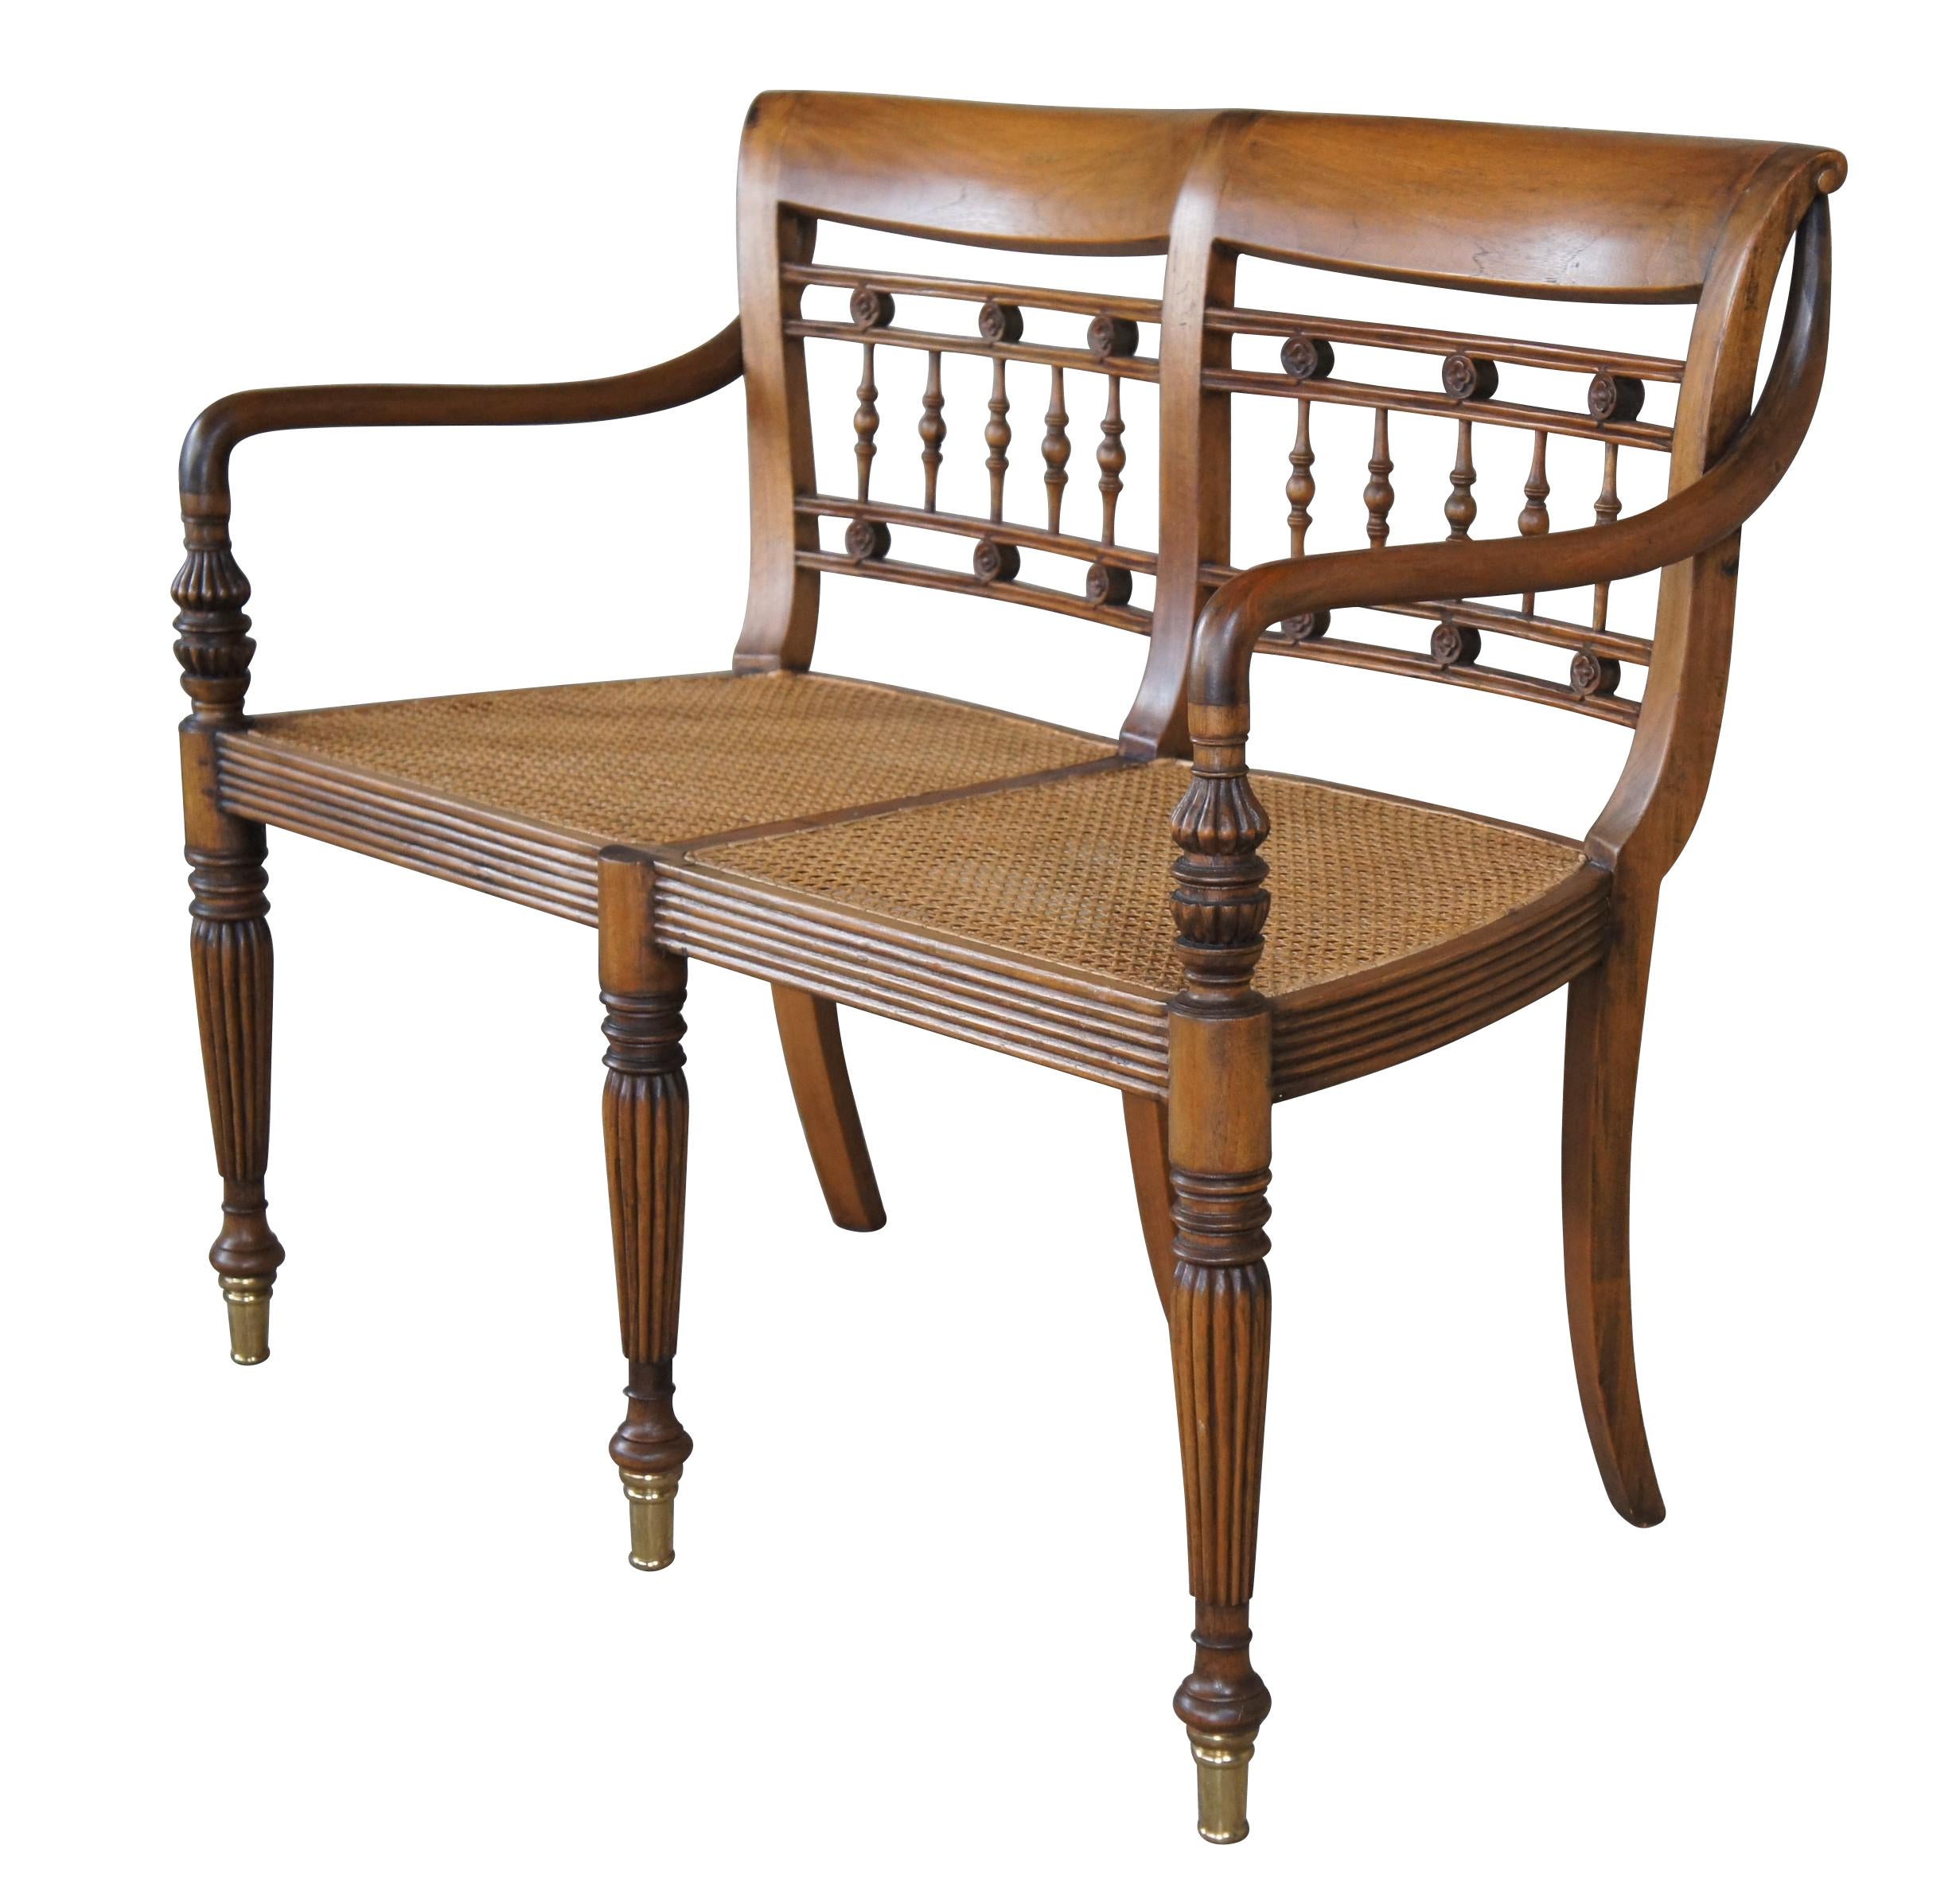 Vintage Pierce Martin British Colonial Regency Plantation bench.  Made of mahogany featuring caned seat with piereced spindel and floral medallion back support, sloped arms, caned seats, and fluted tapered legs with brass capped